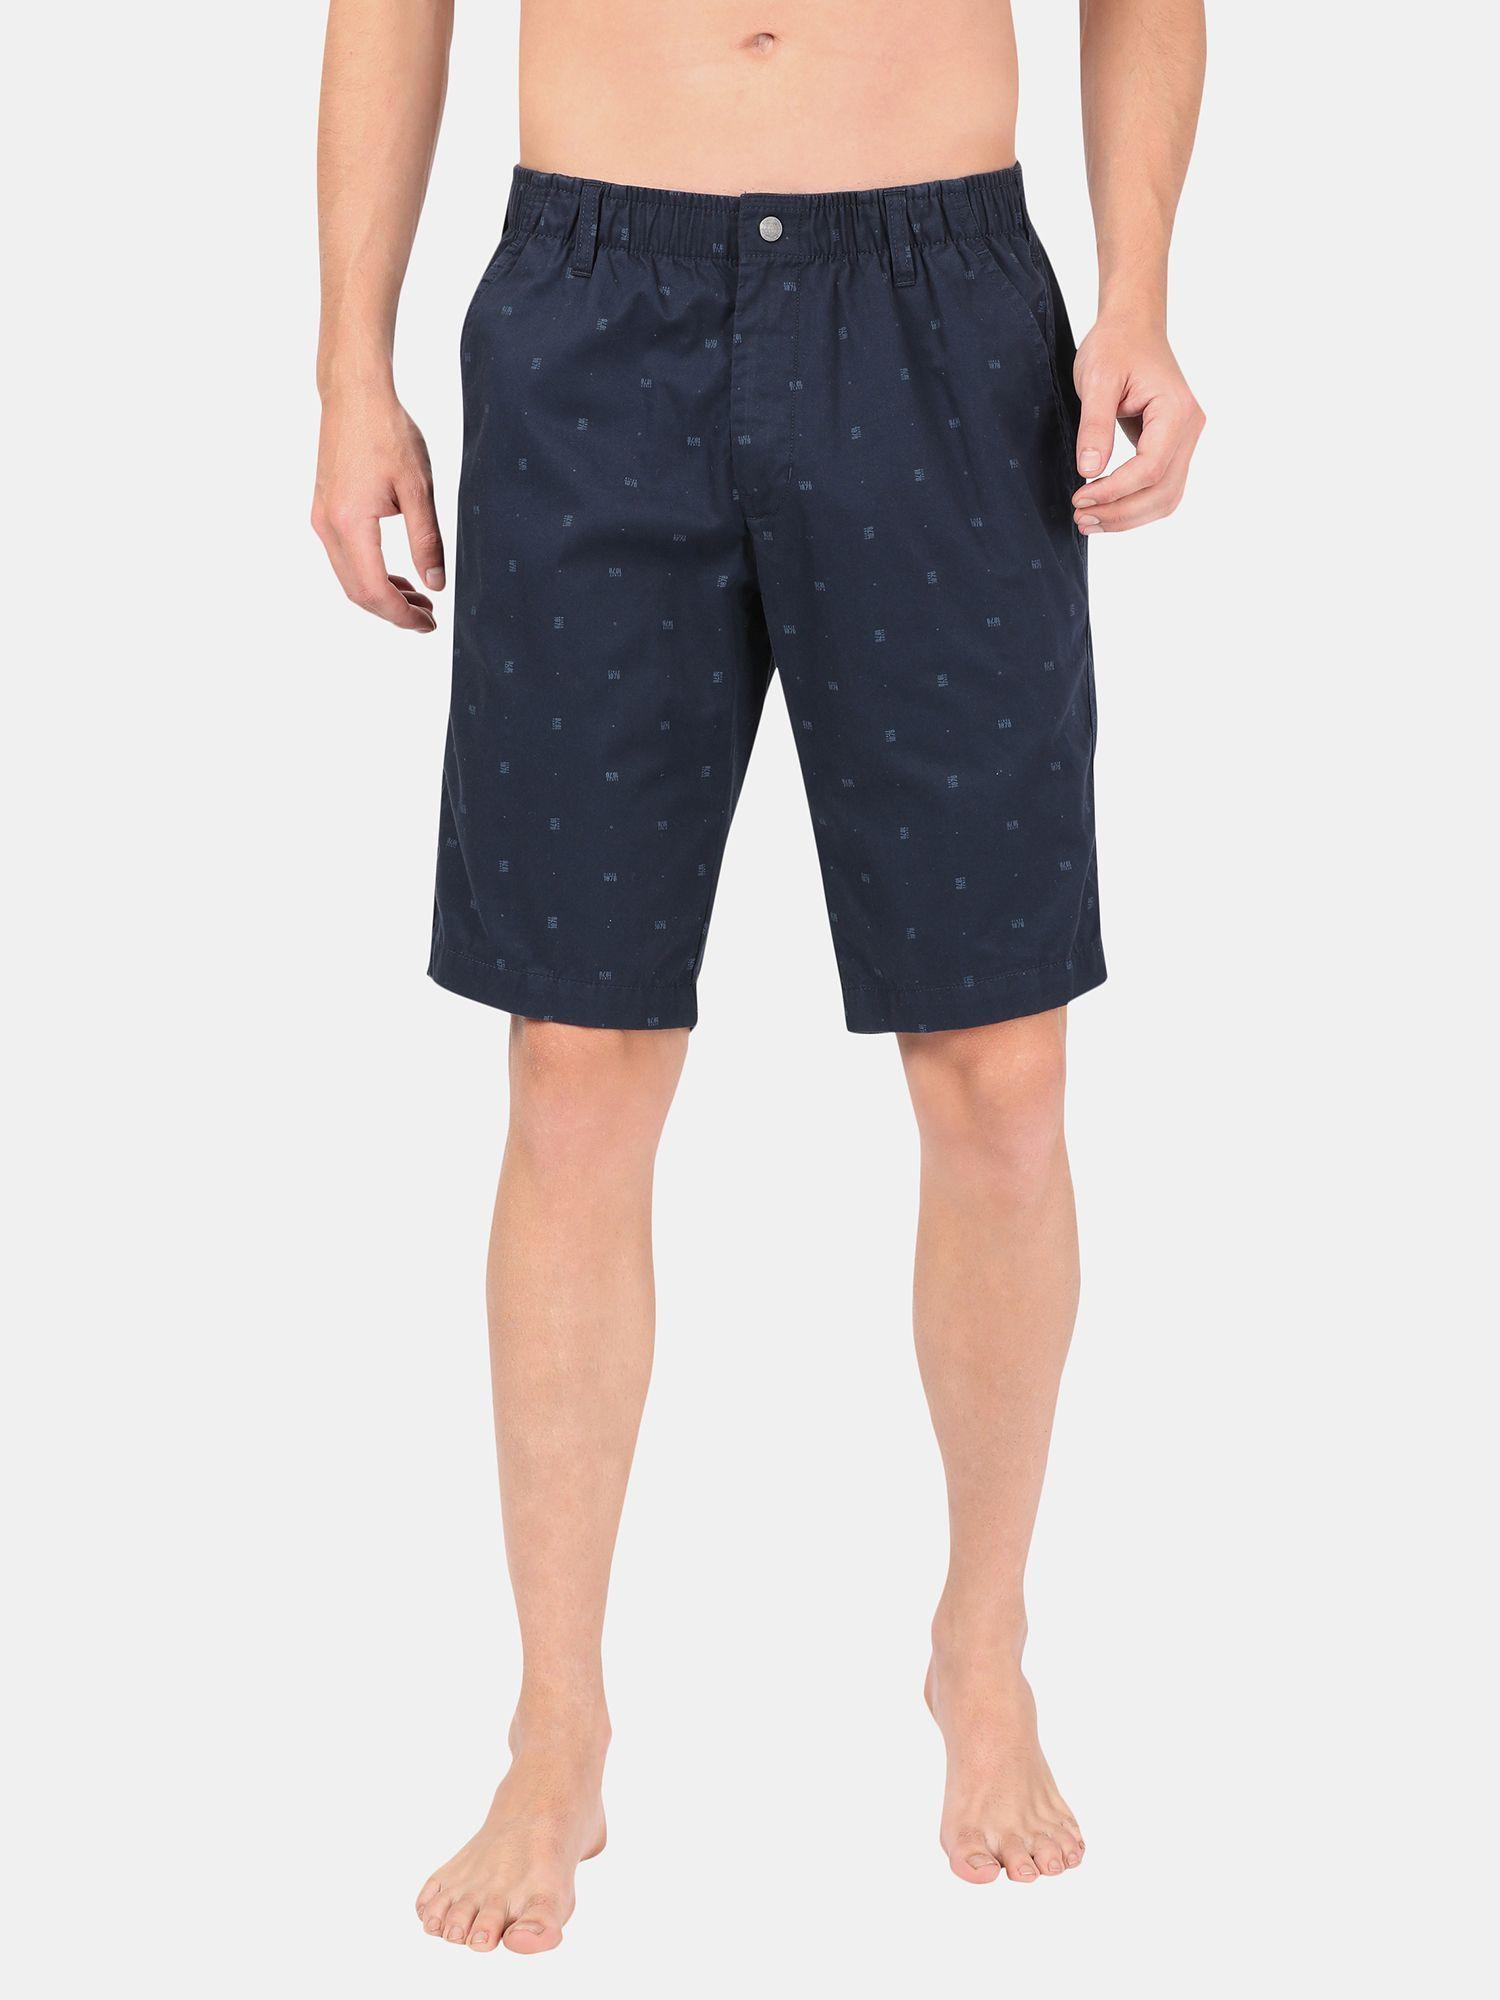 1206 Men Mercerised Cotton Woven Fabric Straight Fit Shorts with Side Pockets - Navy